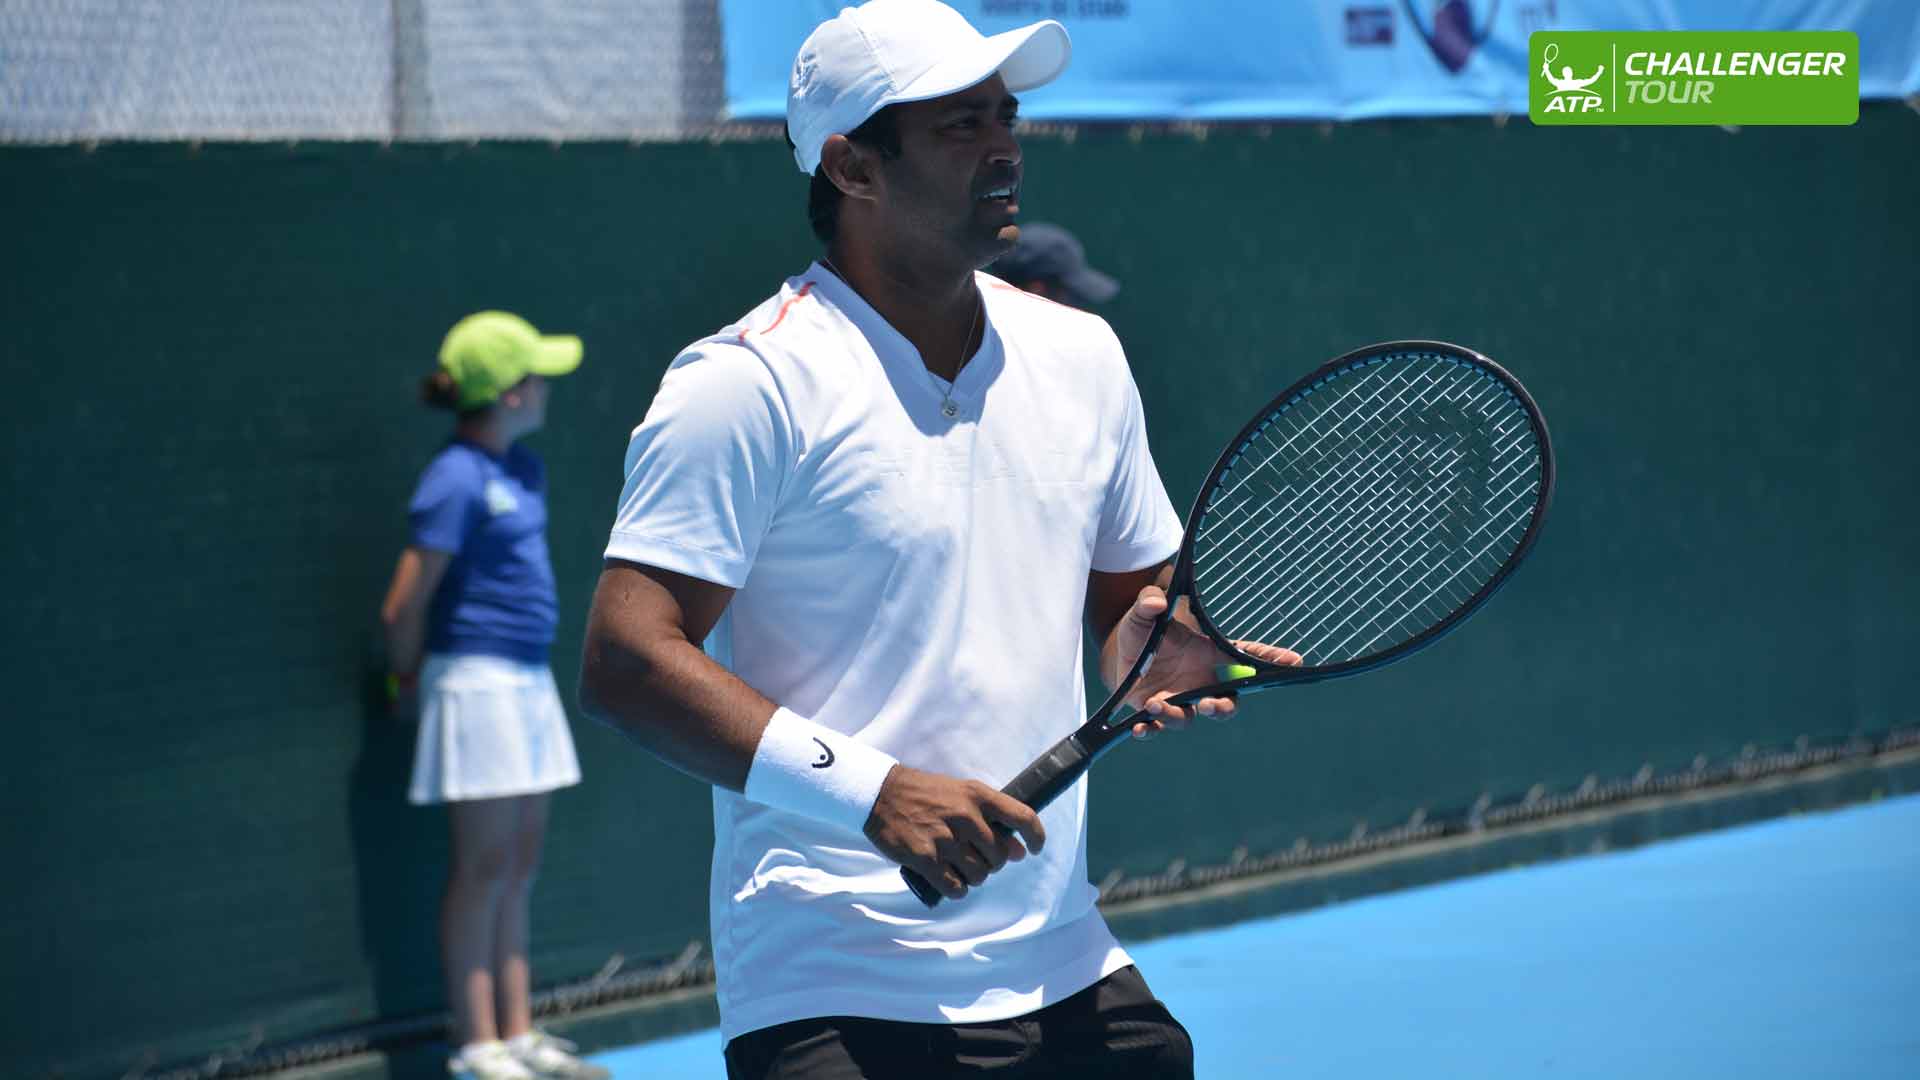 Seventeen-time Grand Slam champion Leander Paes thrilled fans on the doubles court at the ATP Challenger Tour event in Leon.